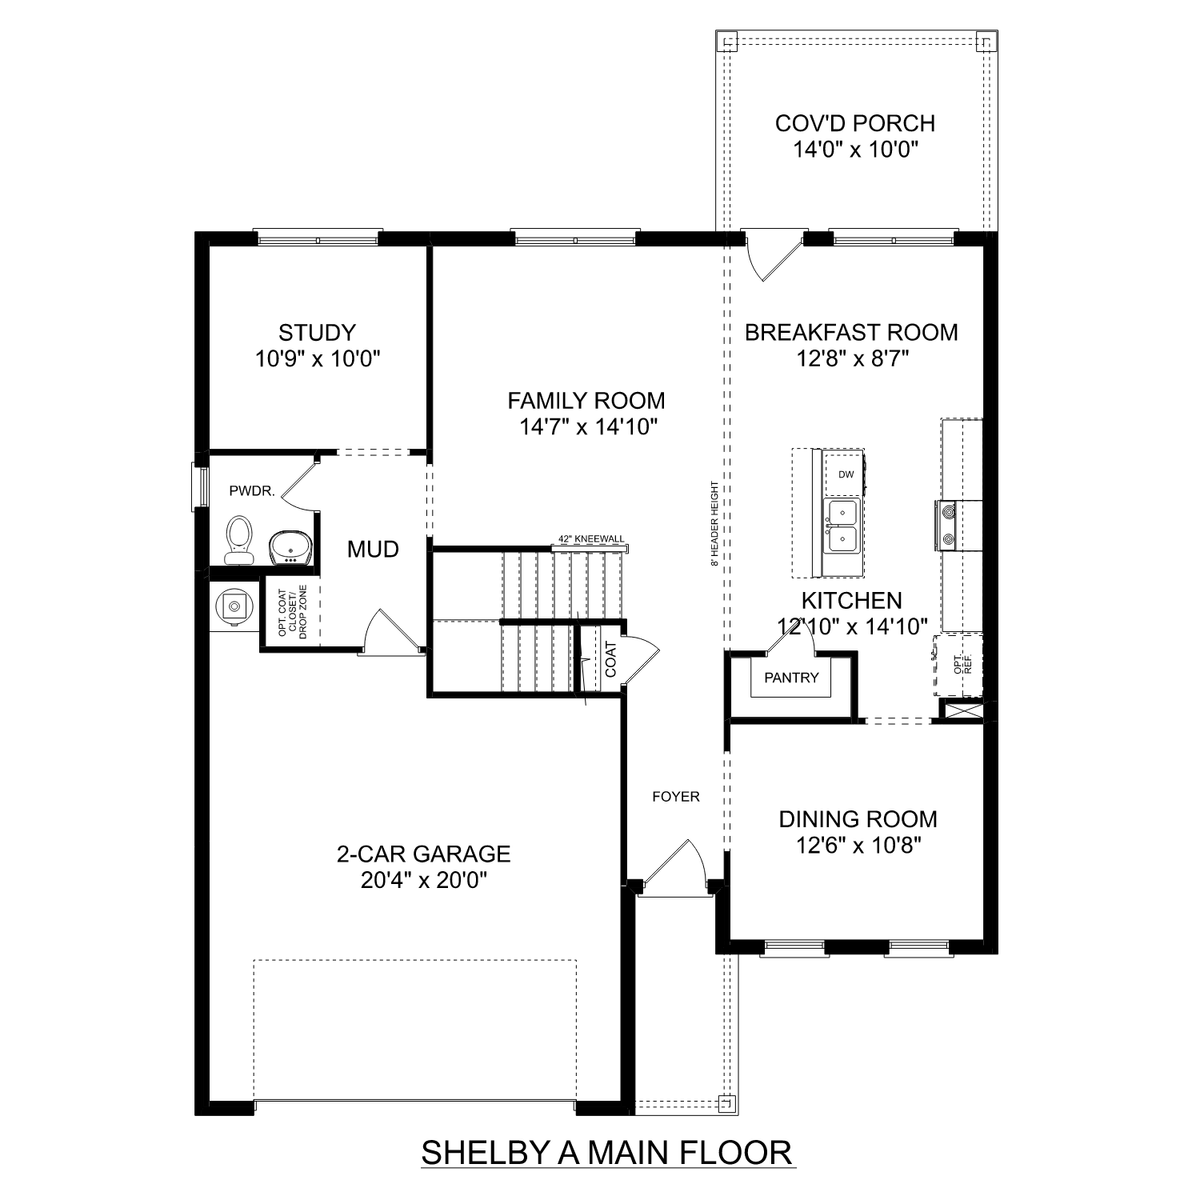 1 - The Shelby A buildable floor plan layout in Davidson Homes' The Meadows community.